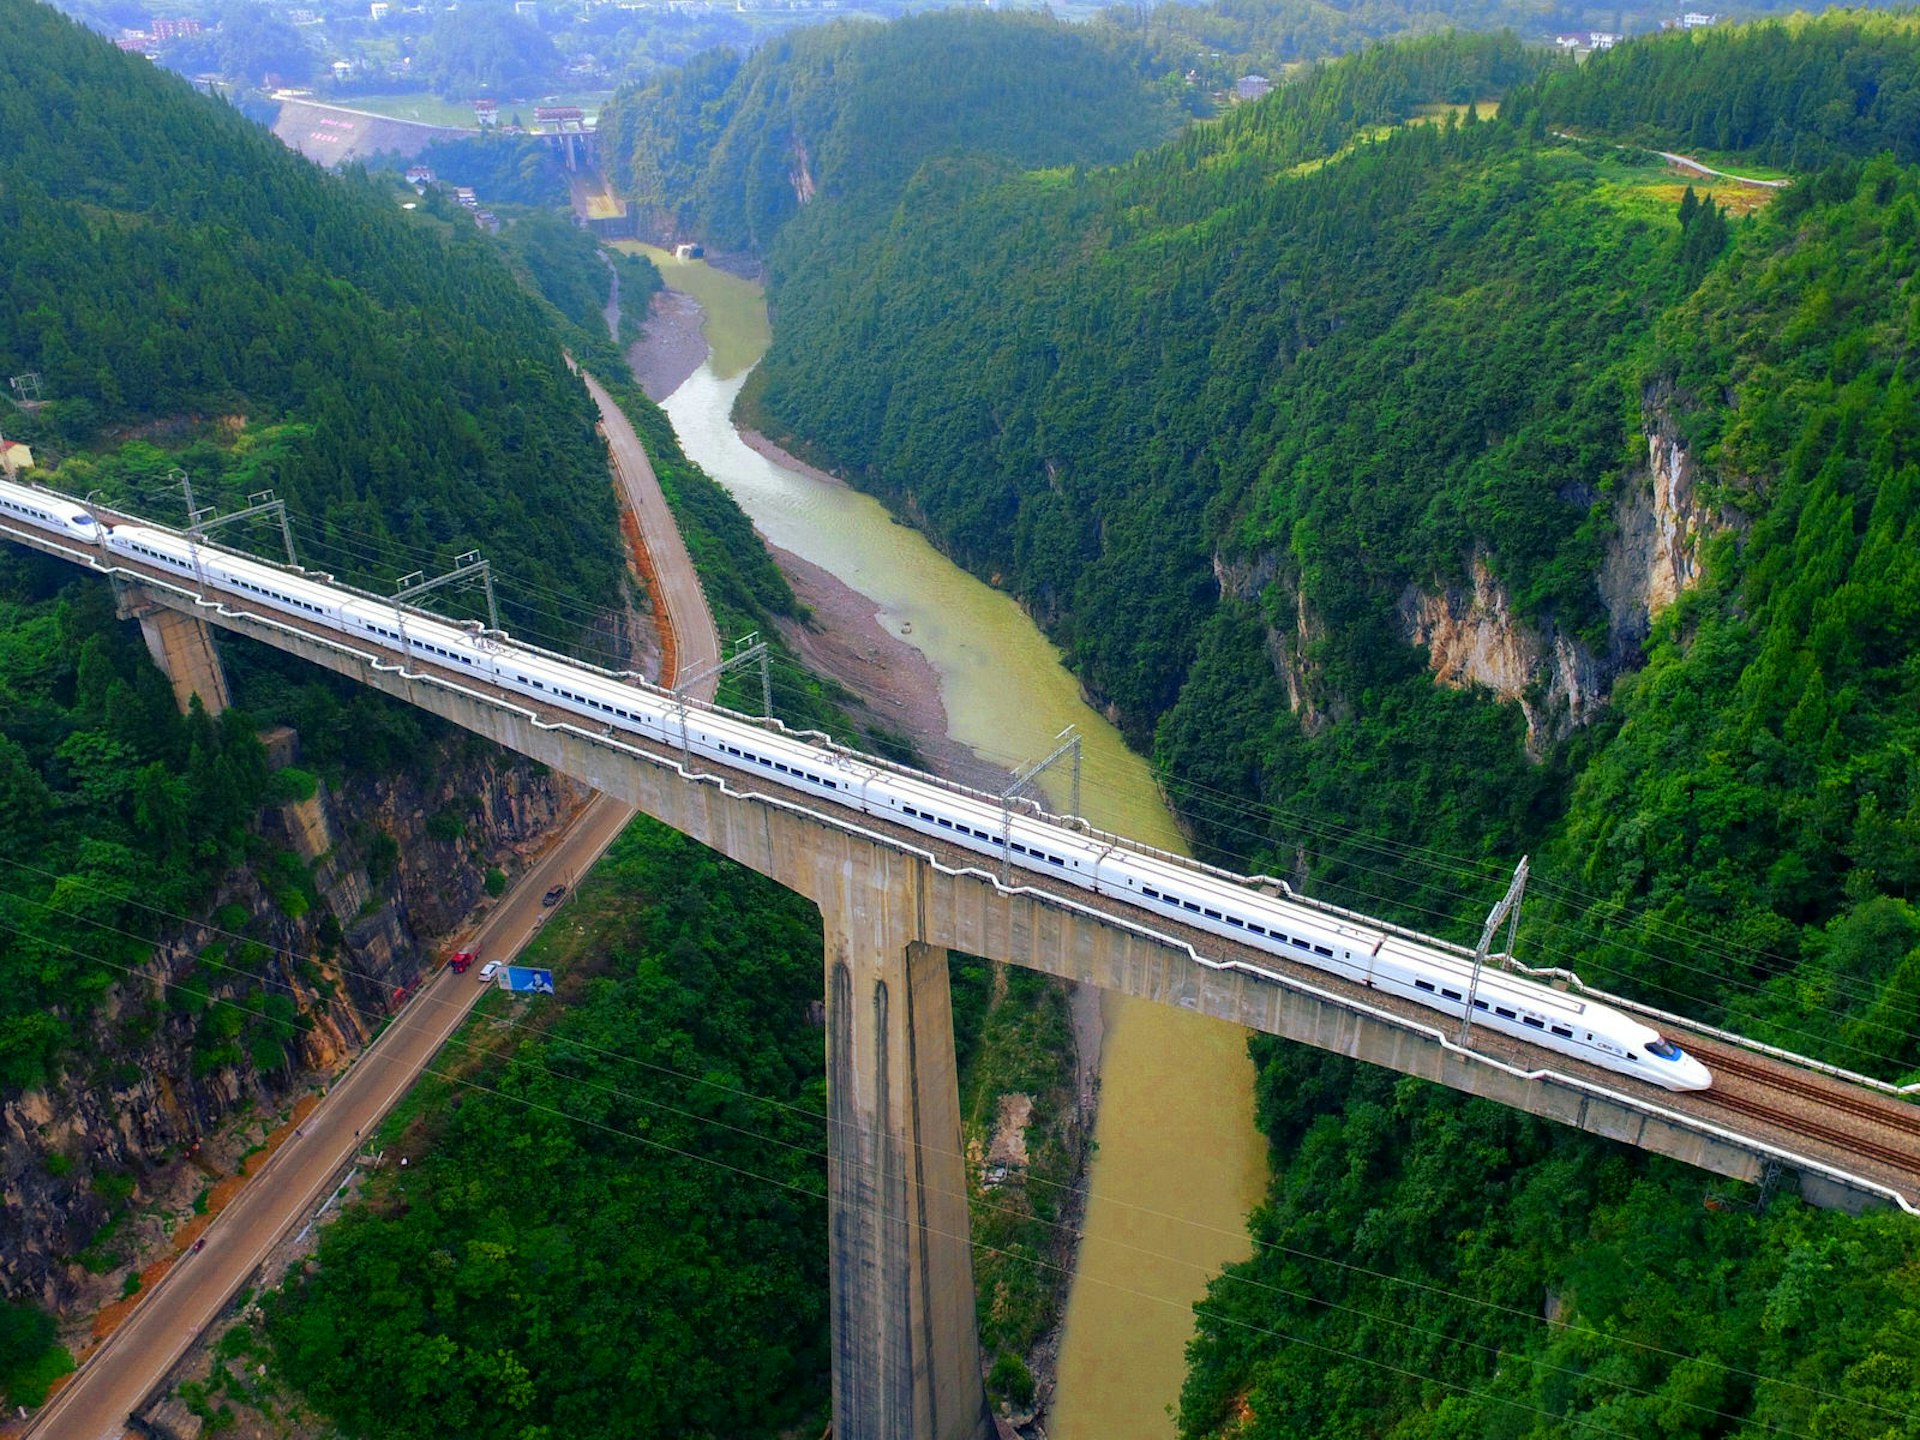 China now boasts the world's largest high-speed rail network, with more than 22,000km of track © Xinhua News Agency / Getty